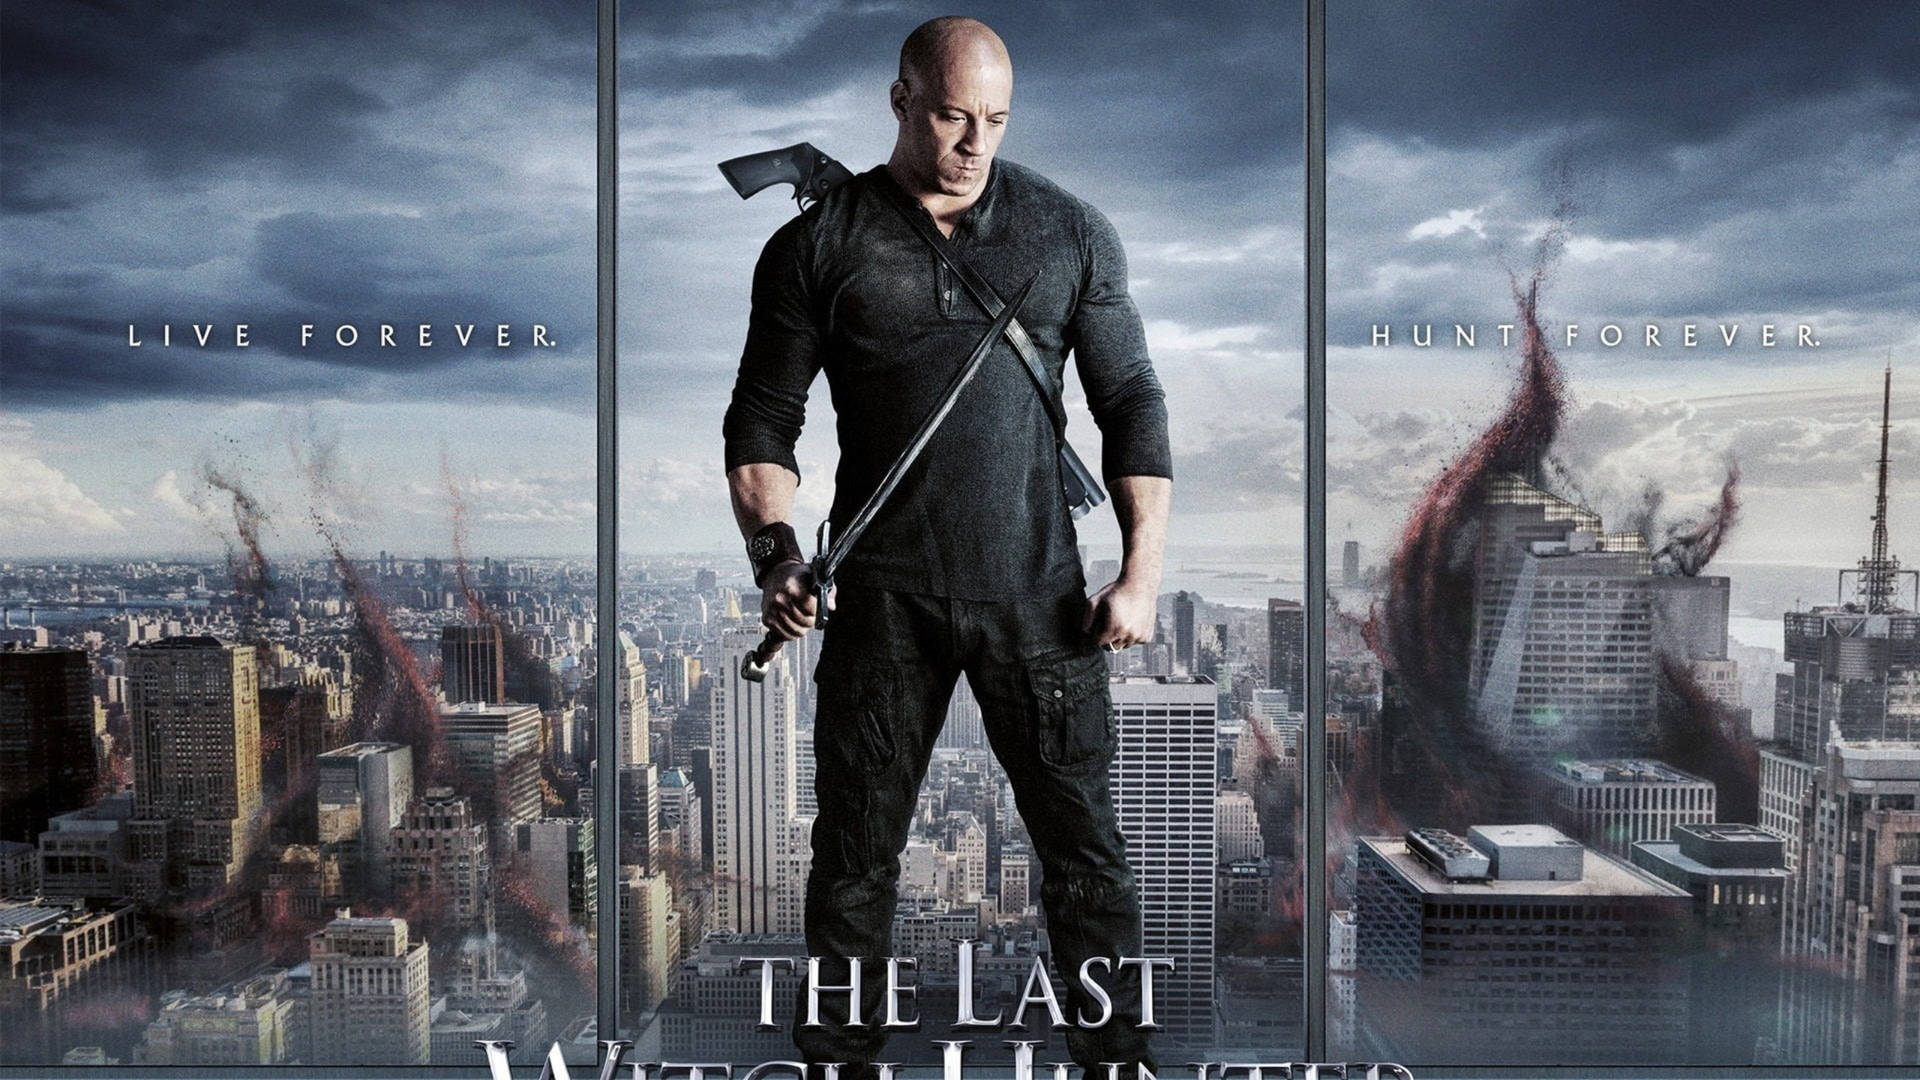 Kaulder The Last Witch Hunter Movie Poster wallpaper